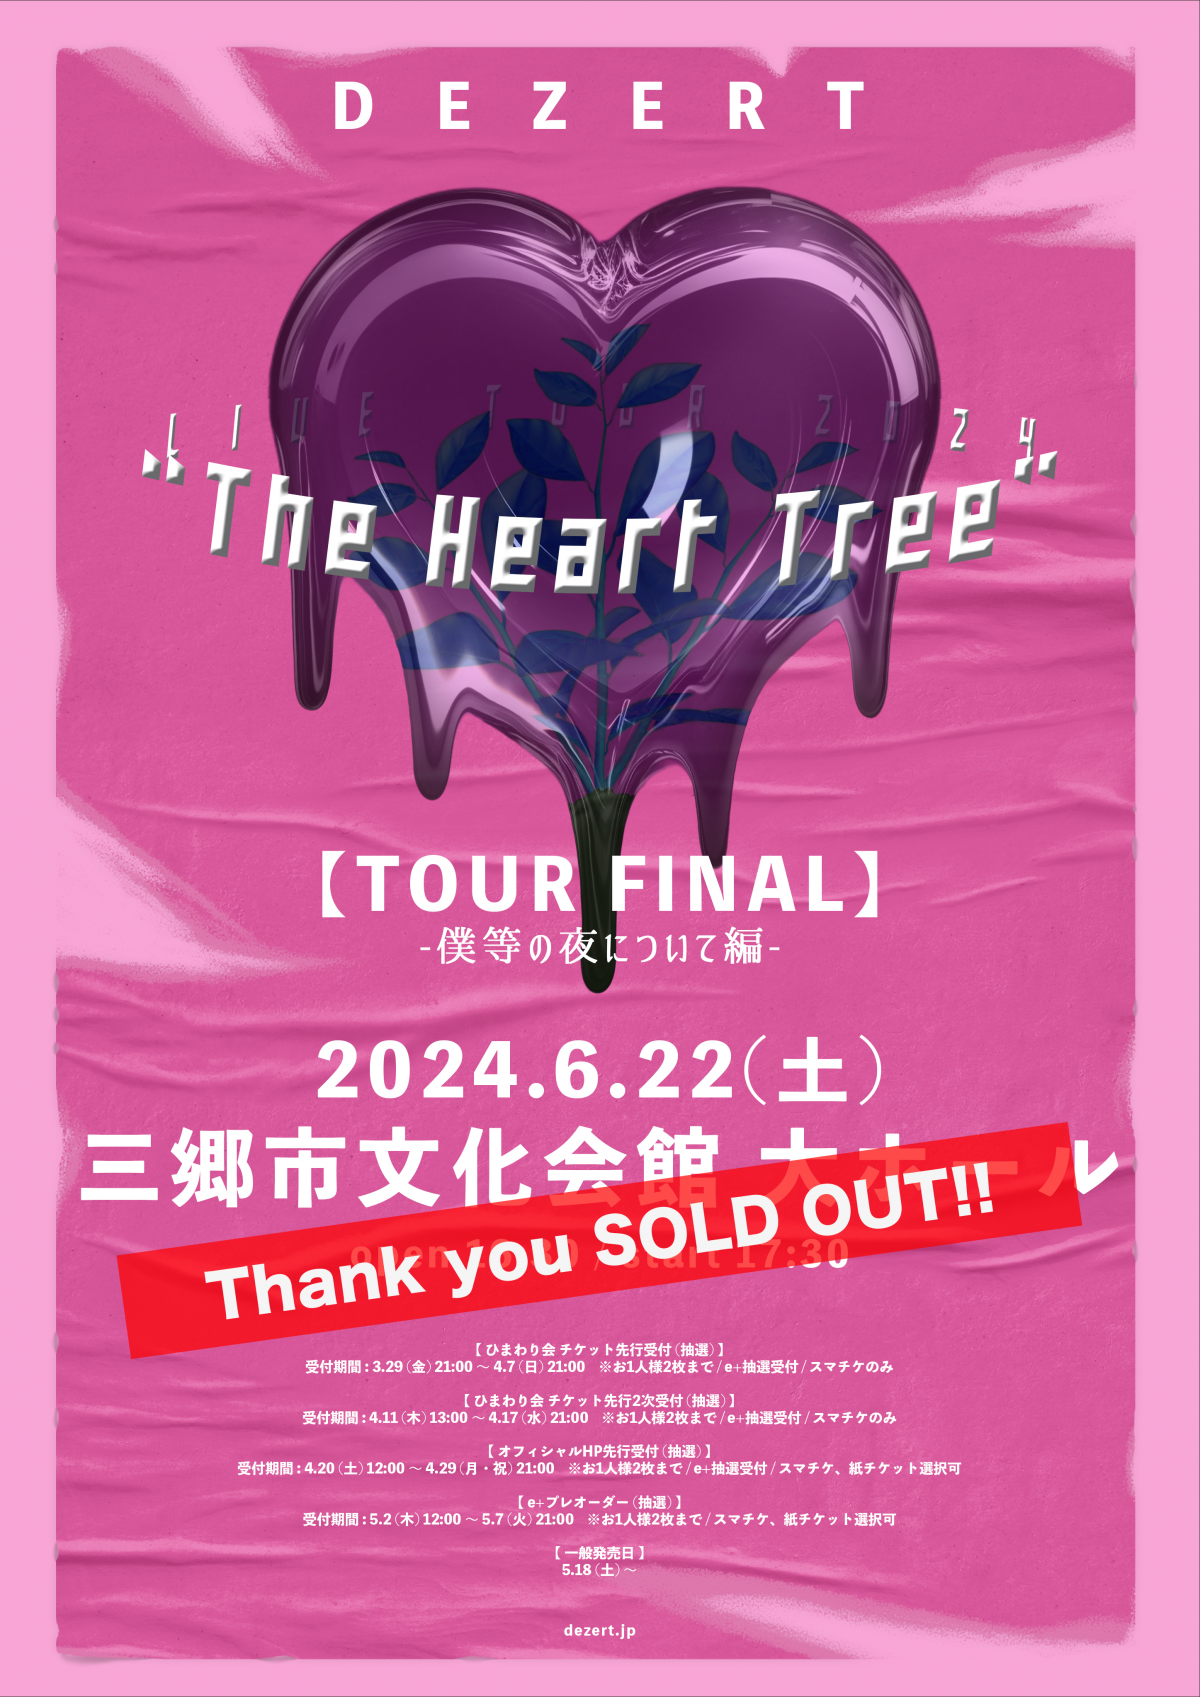 DEZERT LIVE TOUR 2024 “The Heart Tree” 【TOUR FINAL】 -僕等の夜について編- チケットSOLD OUT！